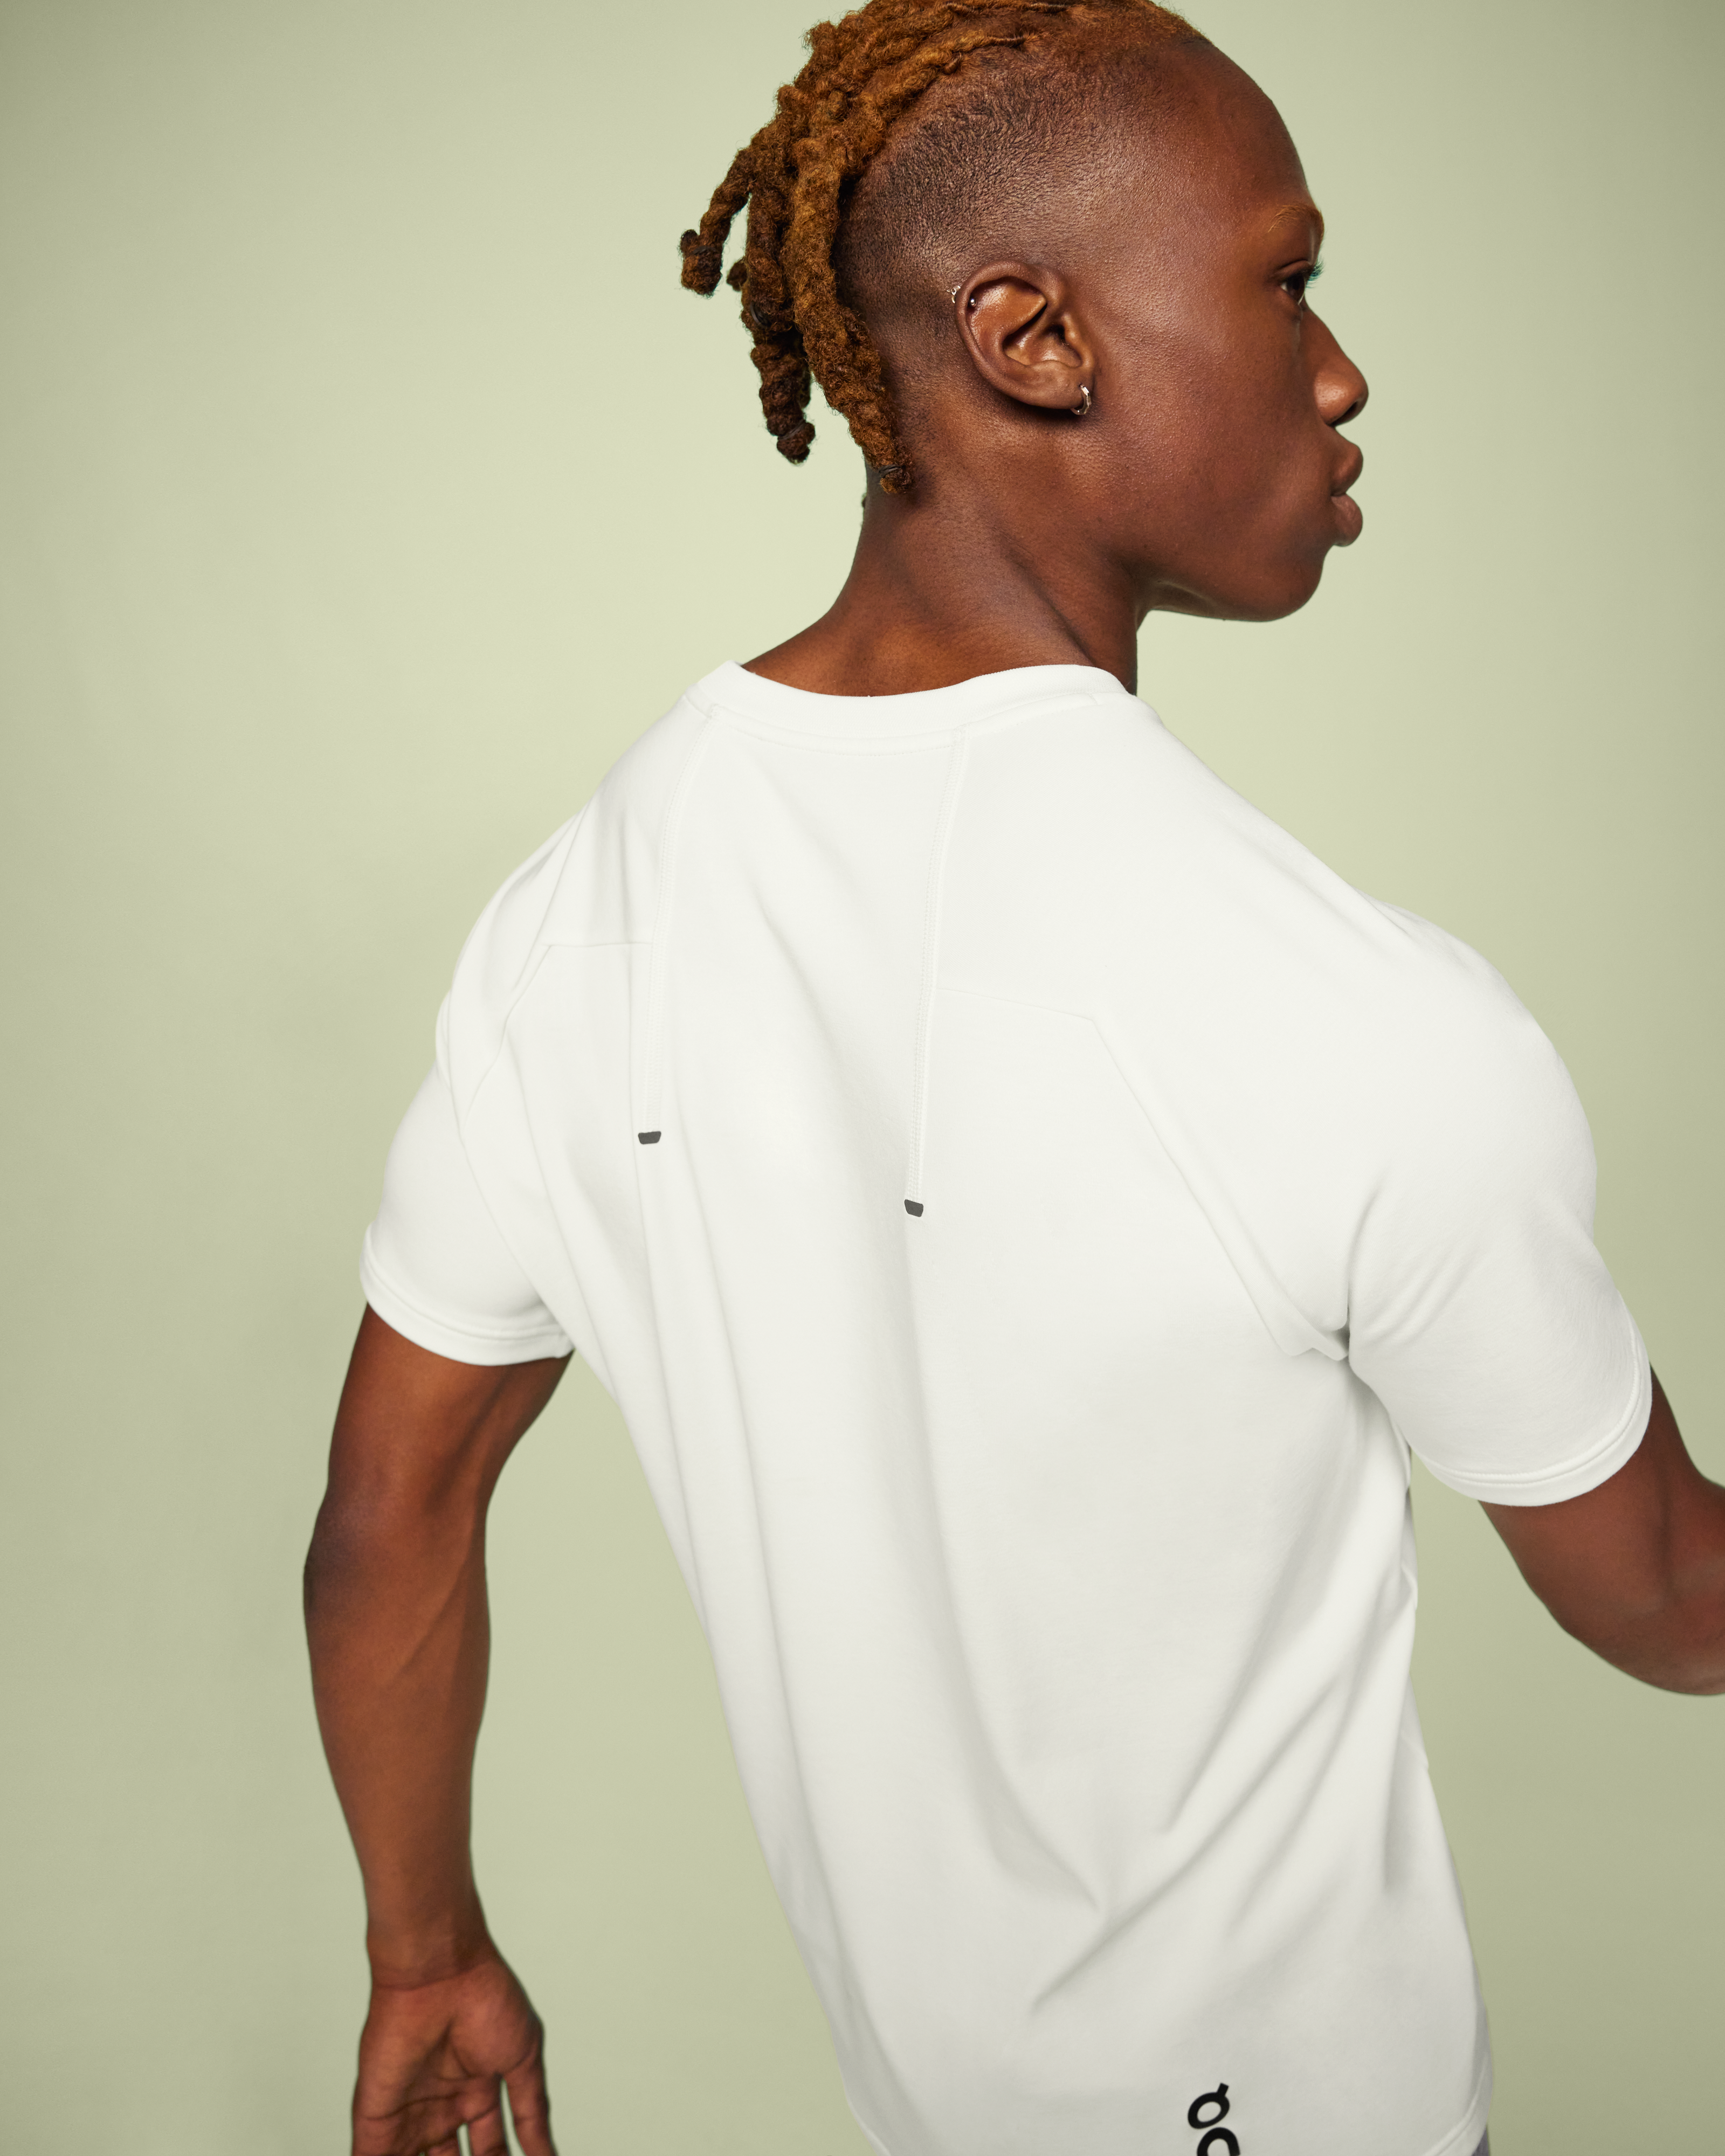 Focus-T: High-performance tee for people on the go